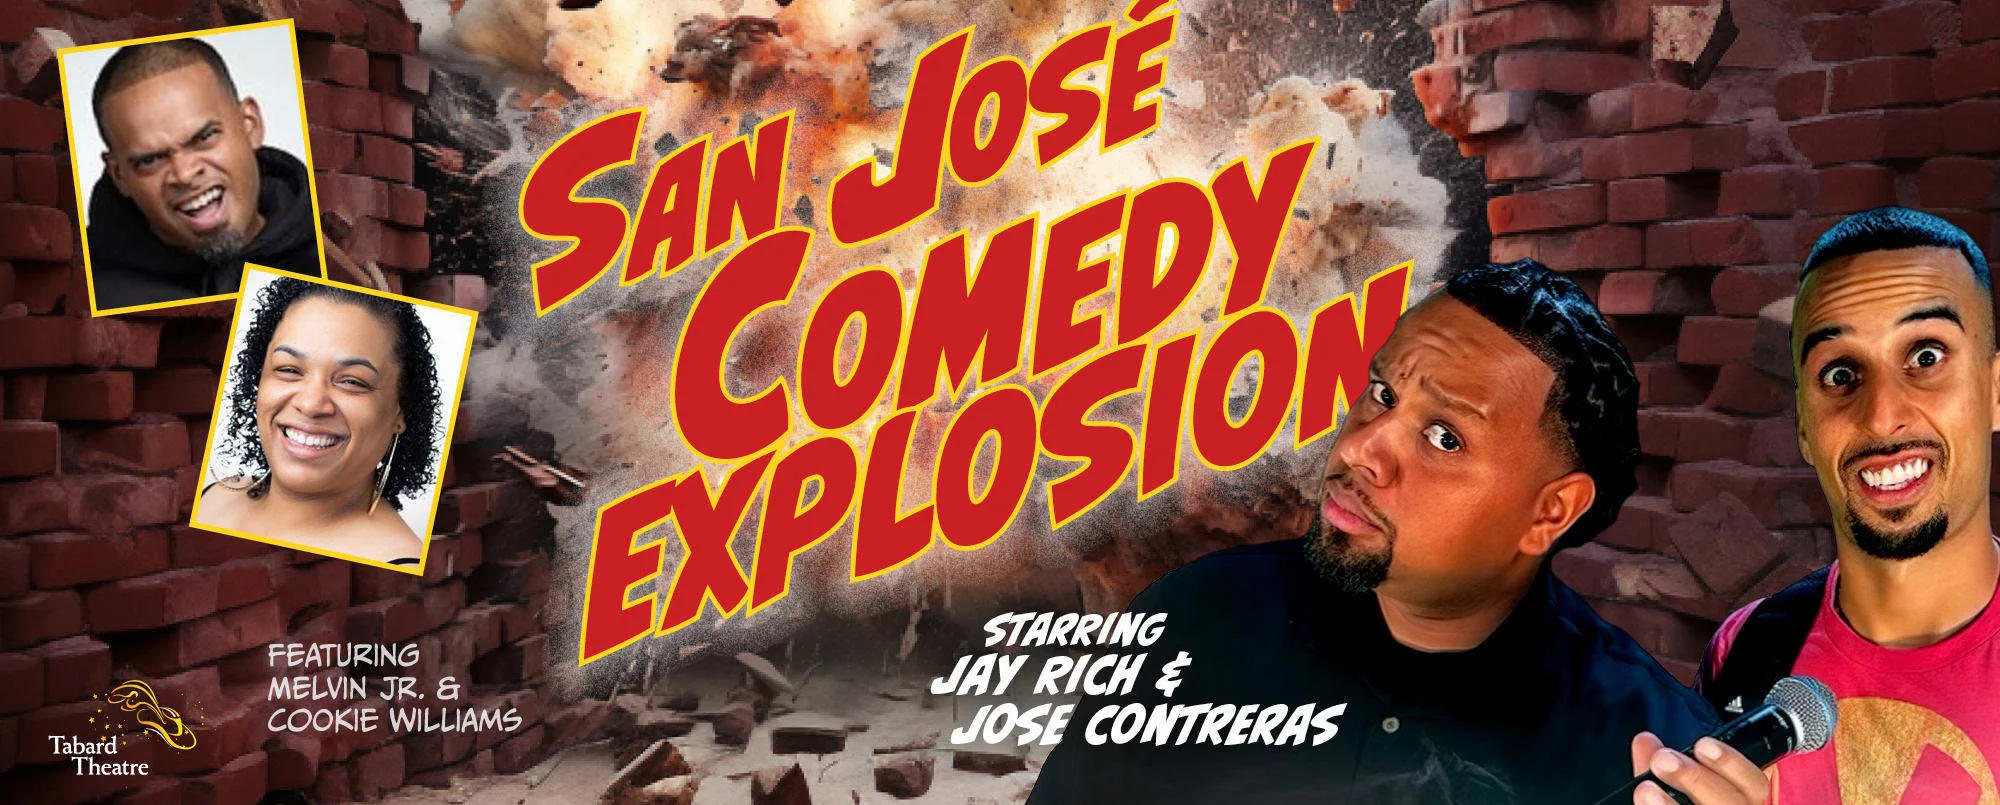 The San Jose Comedy Explosion Starring Jay Rich and Jose Contreras